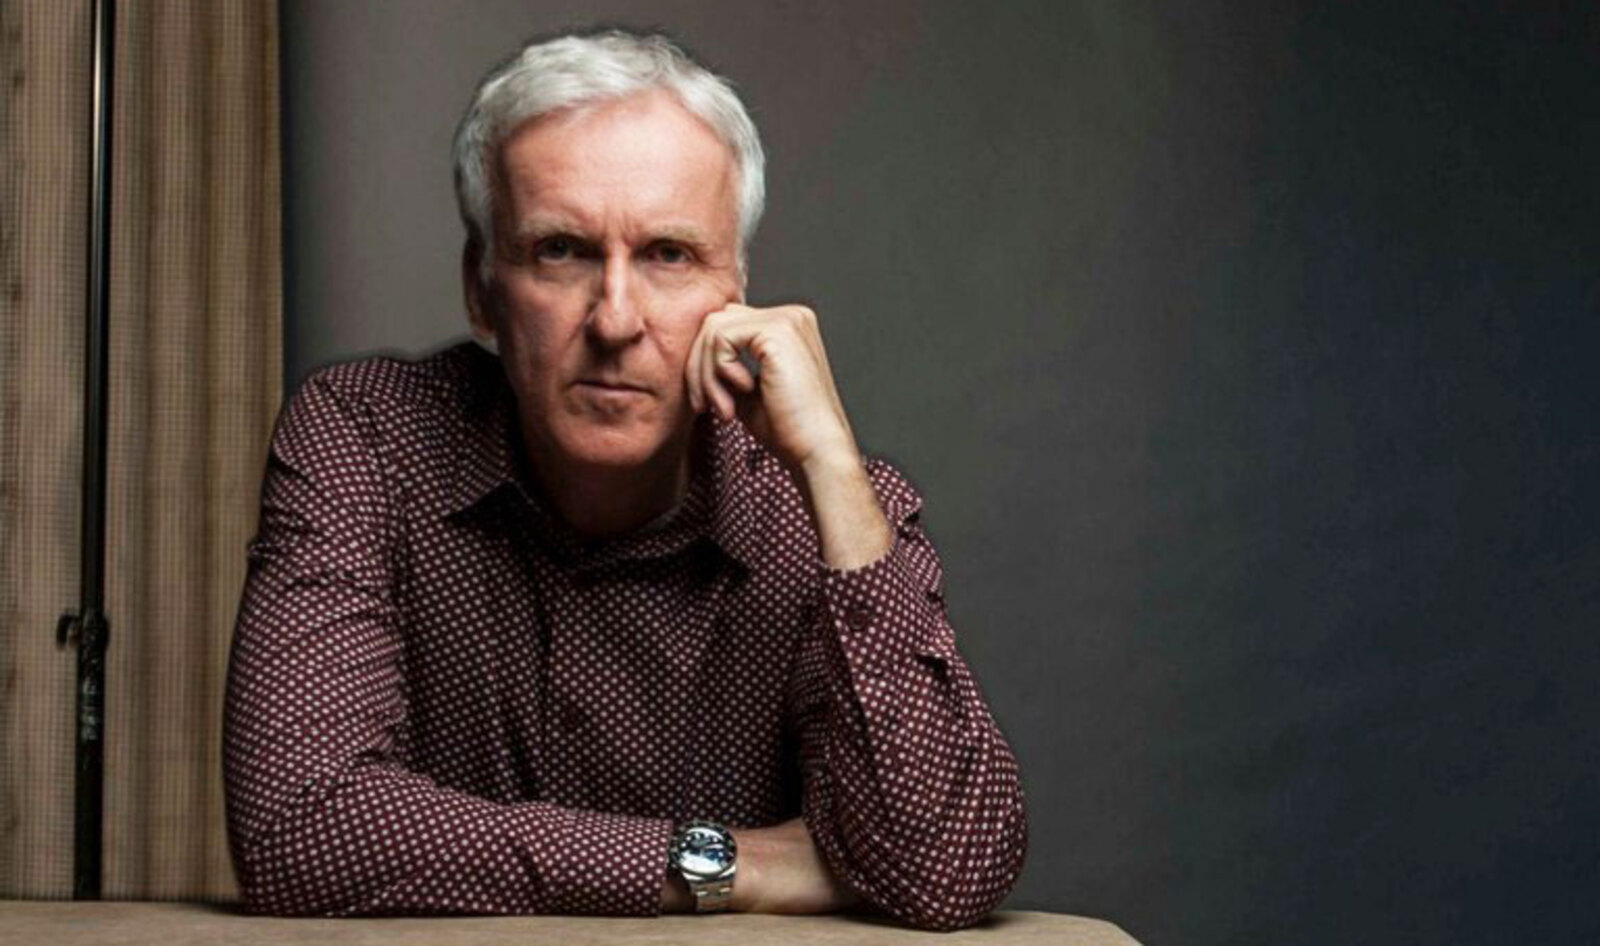 James Cameron: “People Need to Wake the F*ck up” to the Climate Crisis&nbsp;